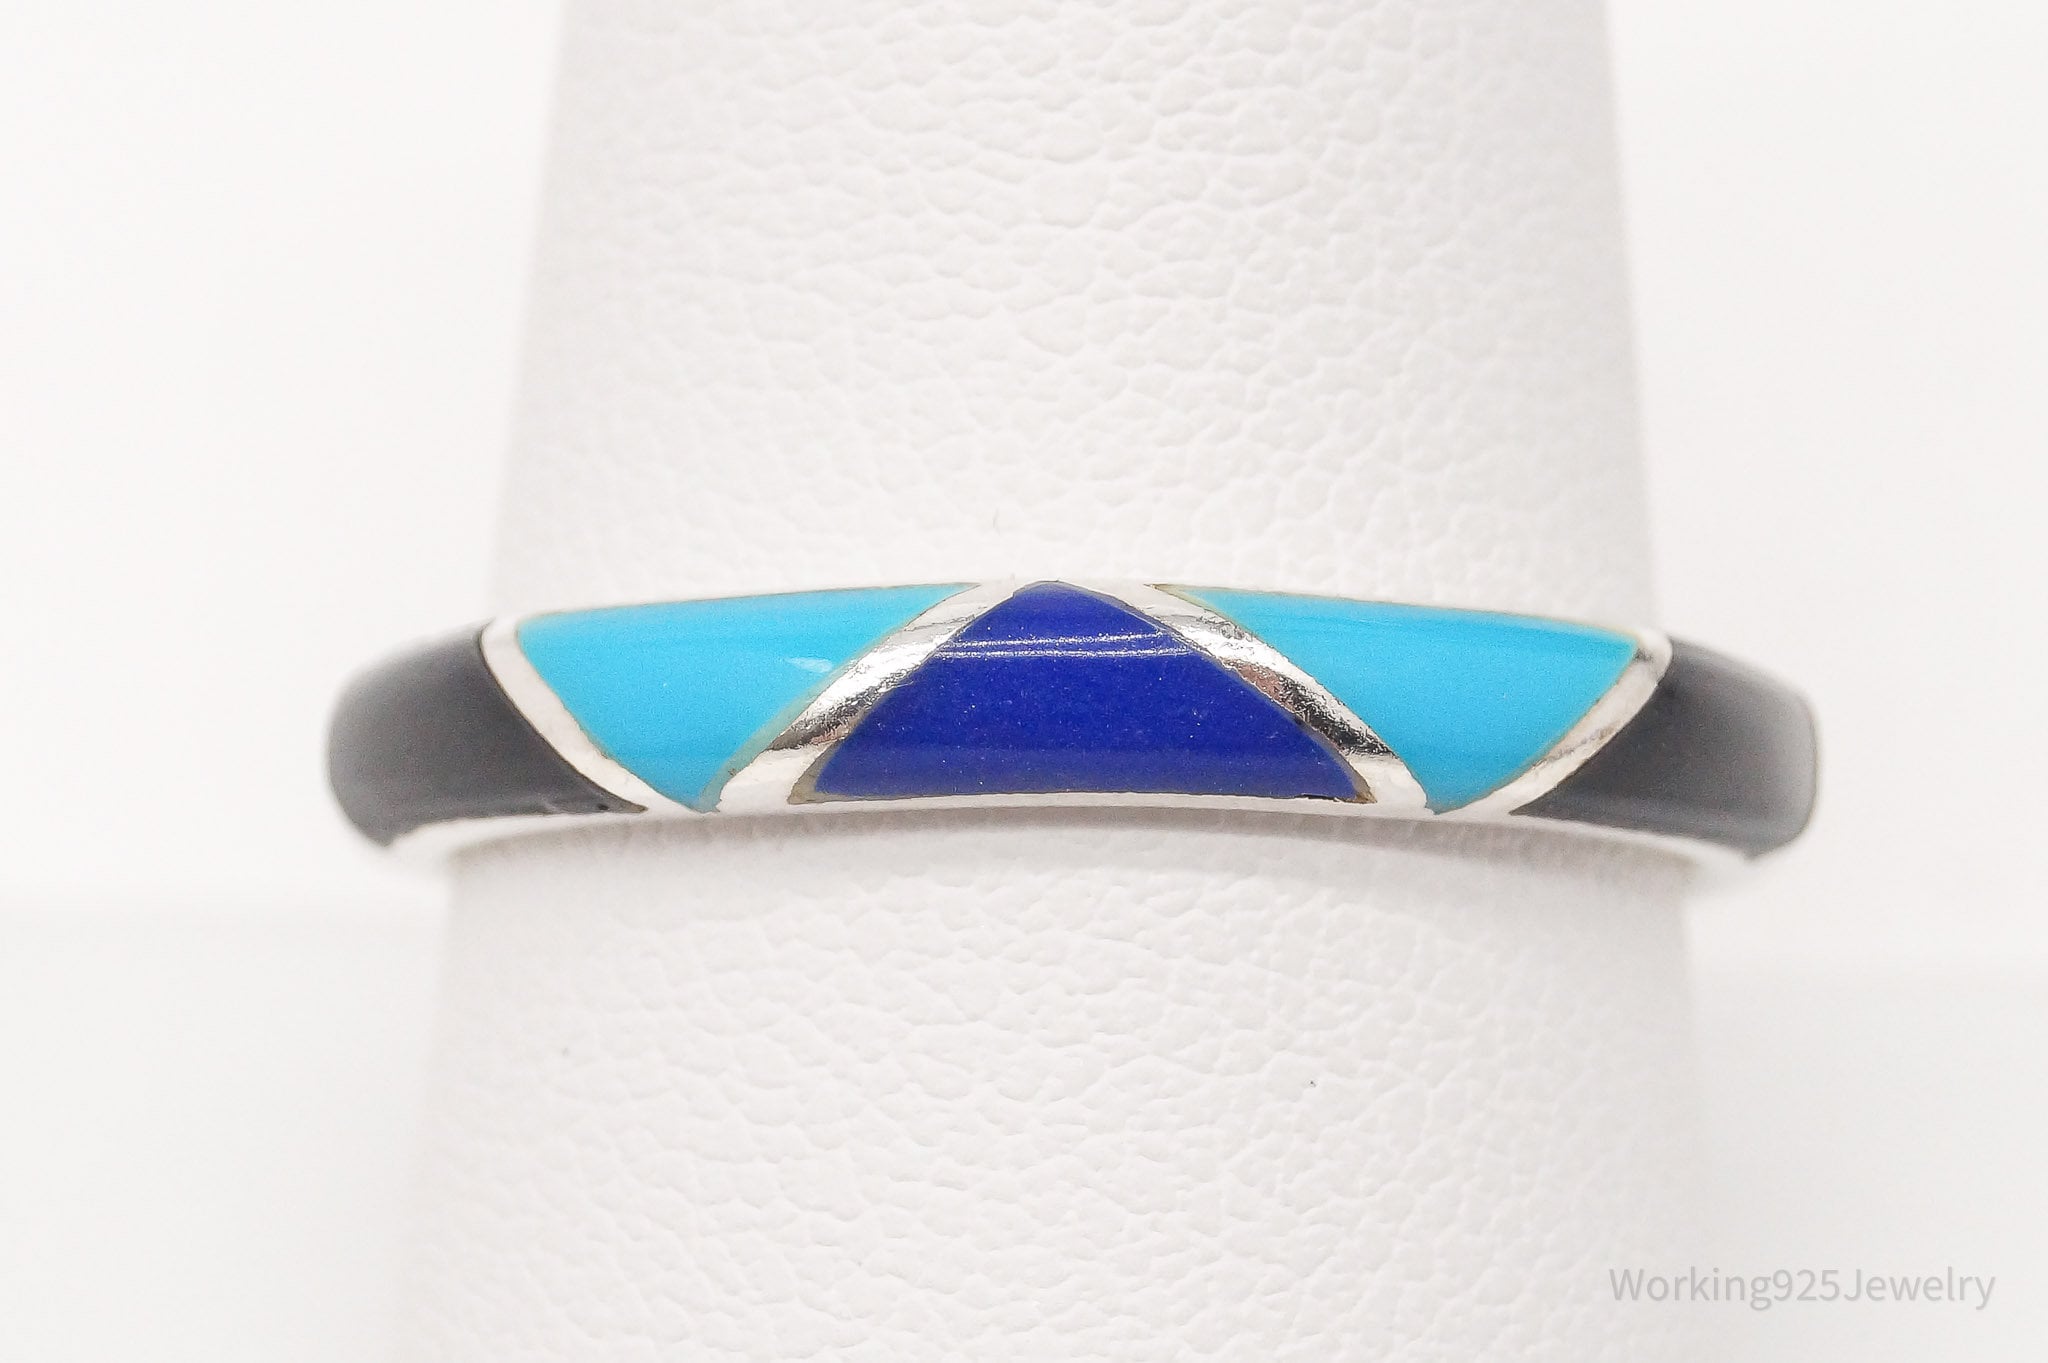 Vintage Turquoise Lapis Lazuli Black Onyx Inlay Sterling Silver Ring - Size 10